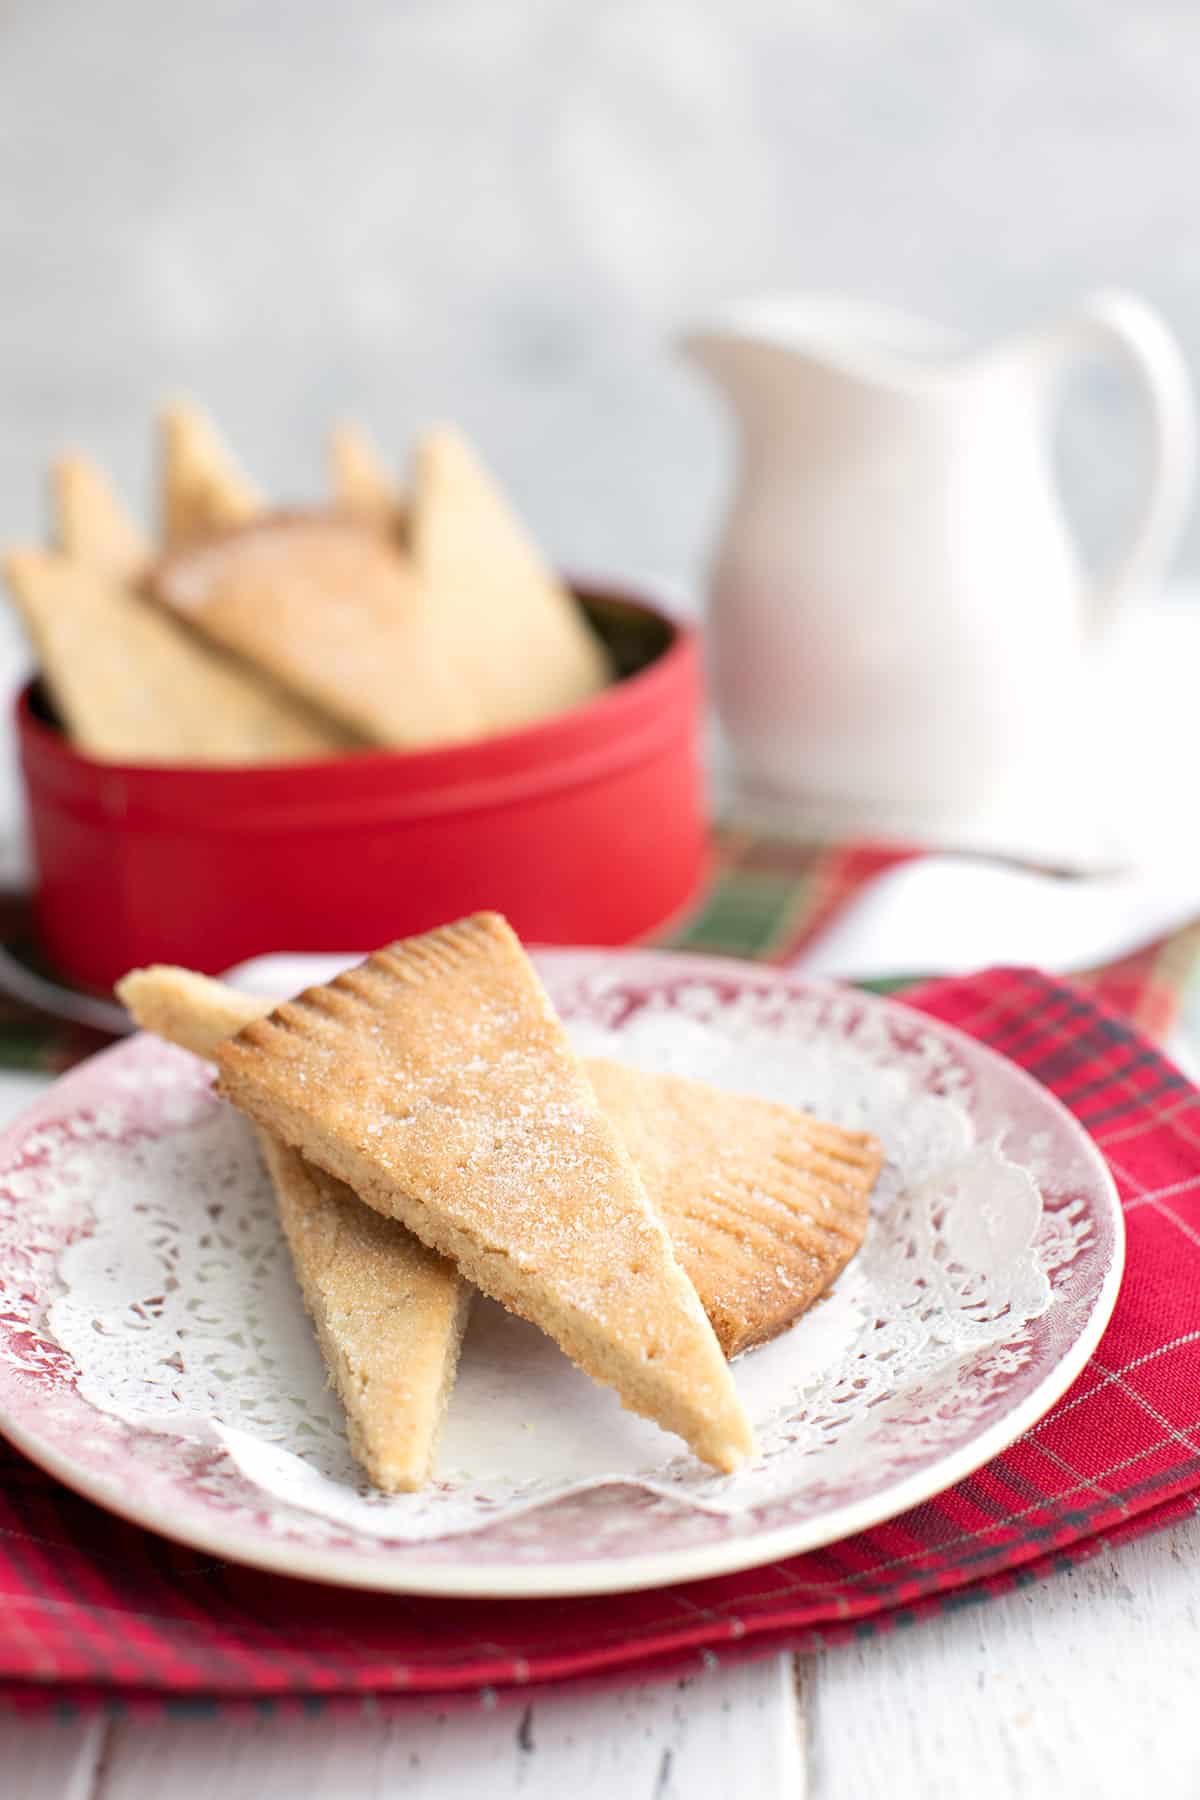 Sugar free keto shortbread cookies piled on a plate over a red patterned napkin.